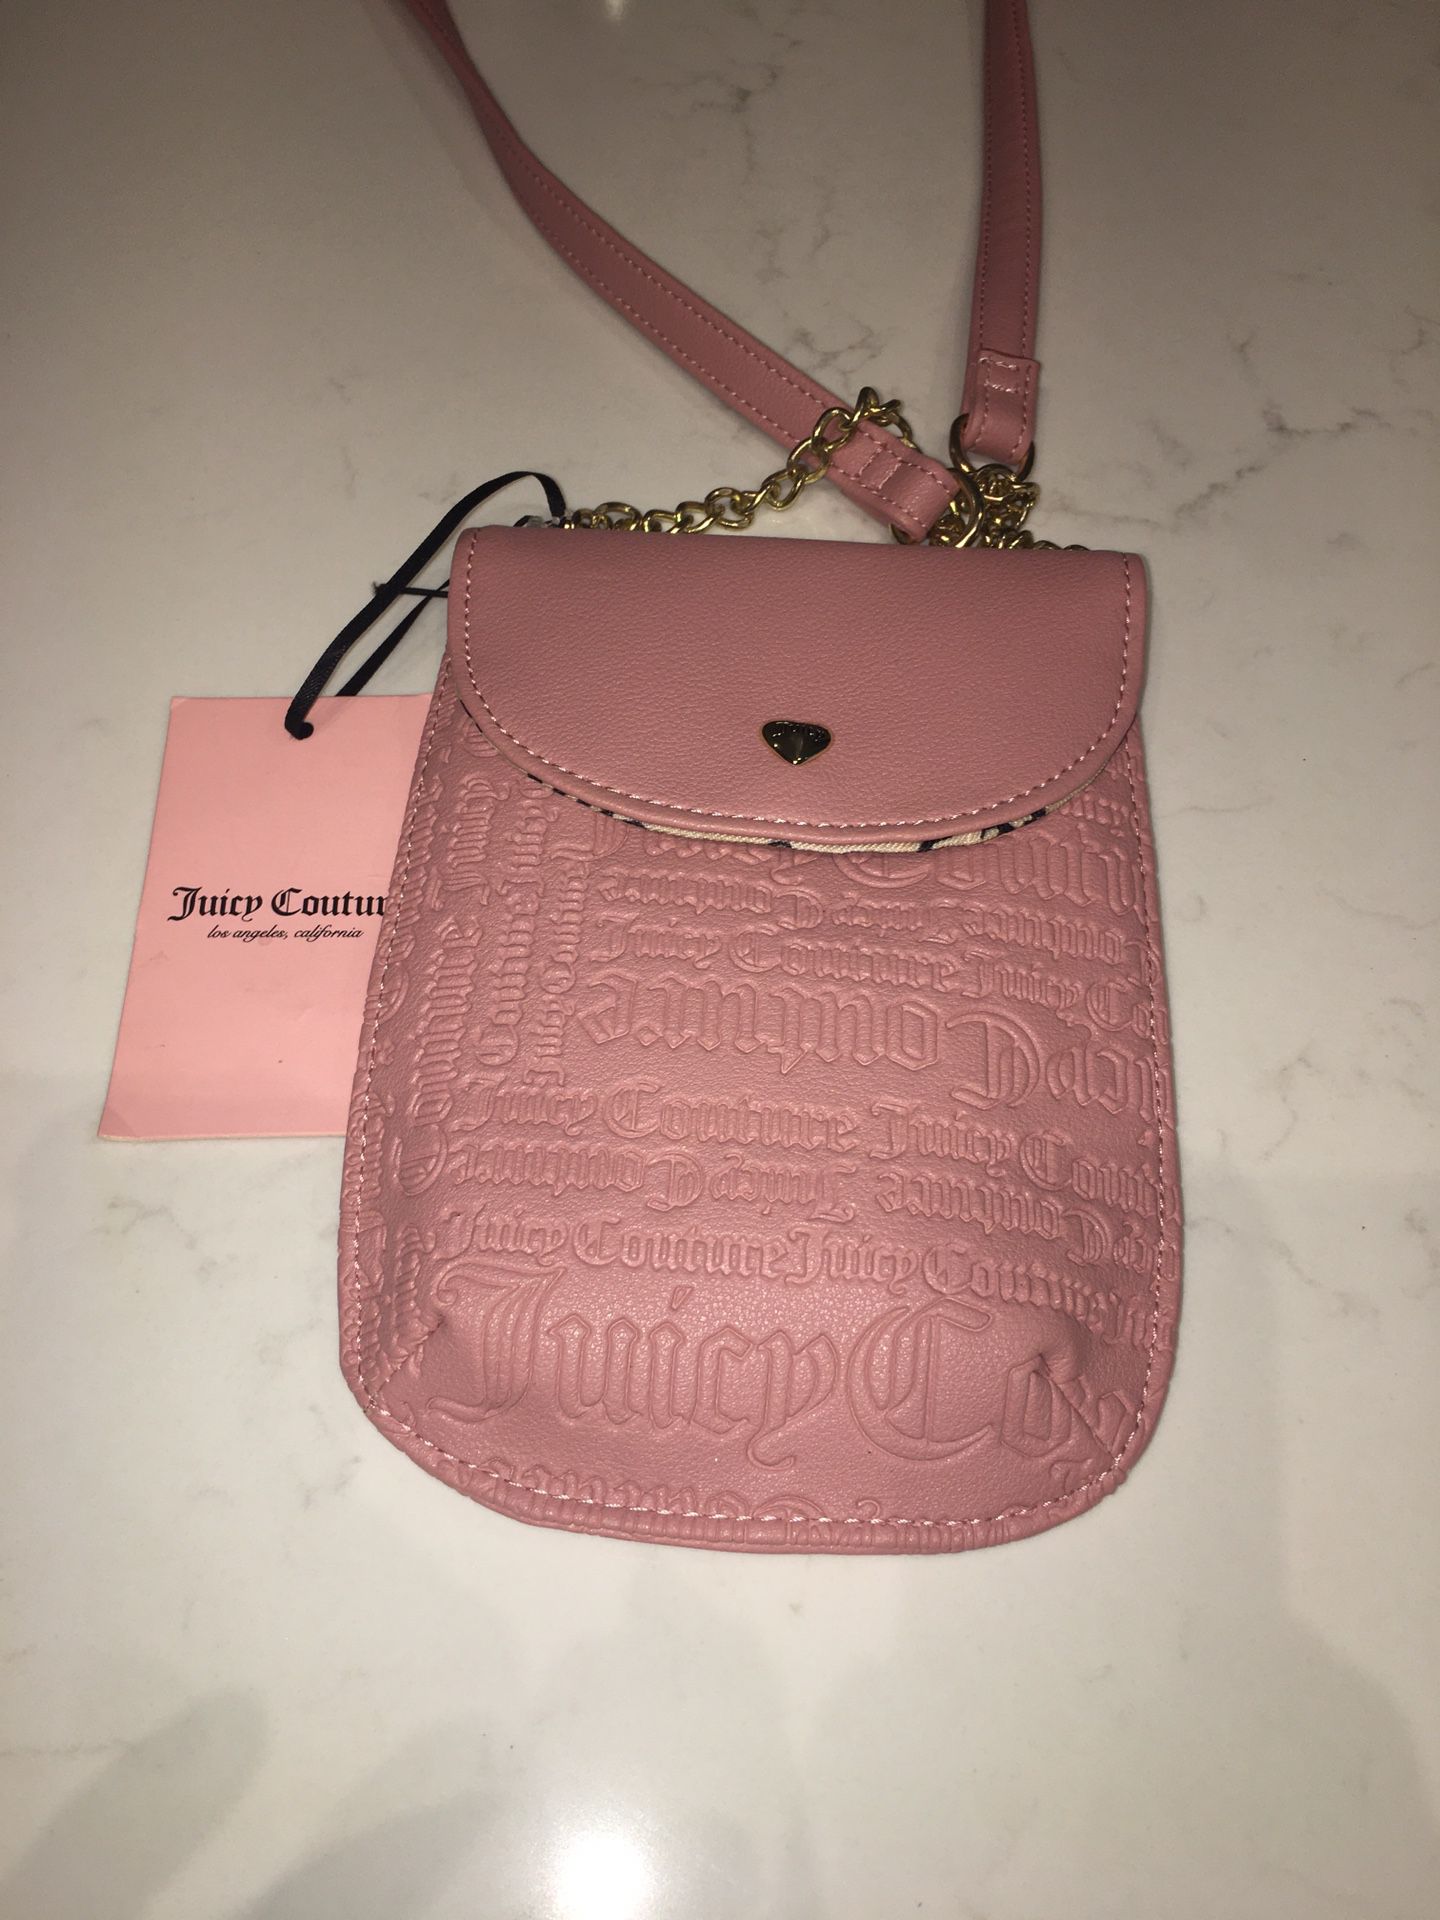 Juicy Couture - Embossed Purse (Crossbody/Pink) - BRAND NEW!